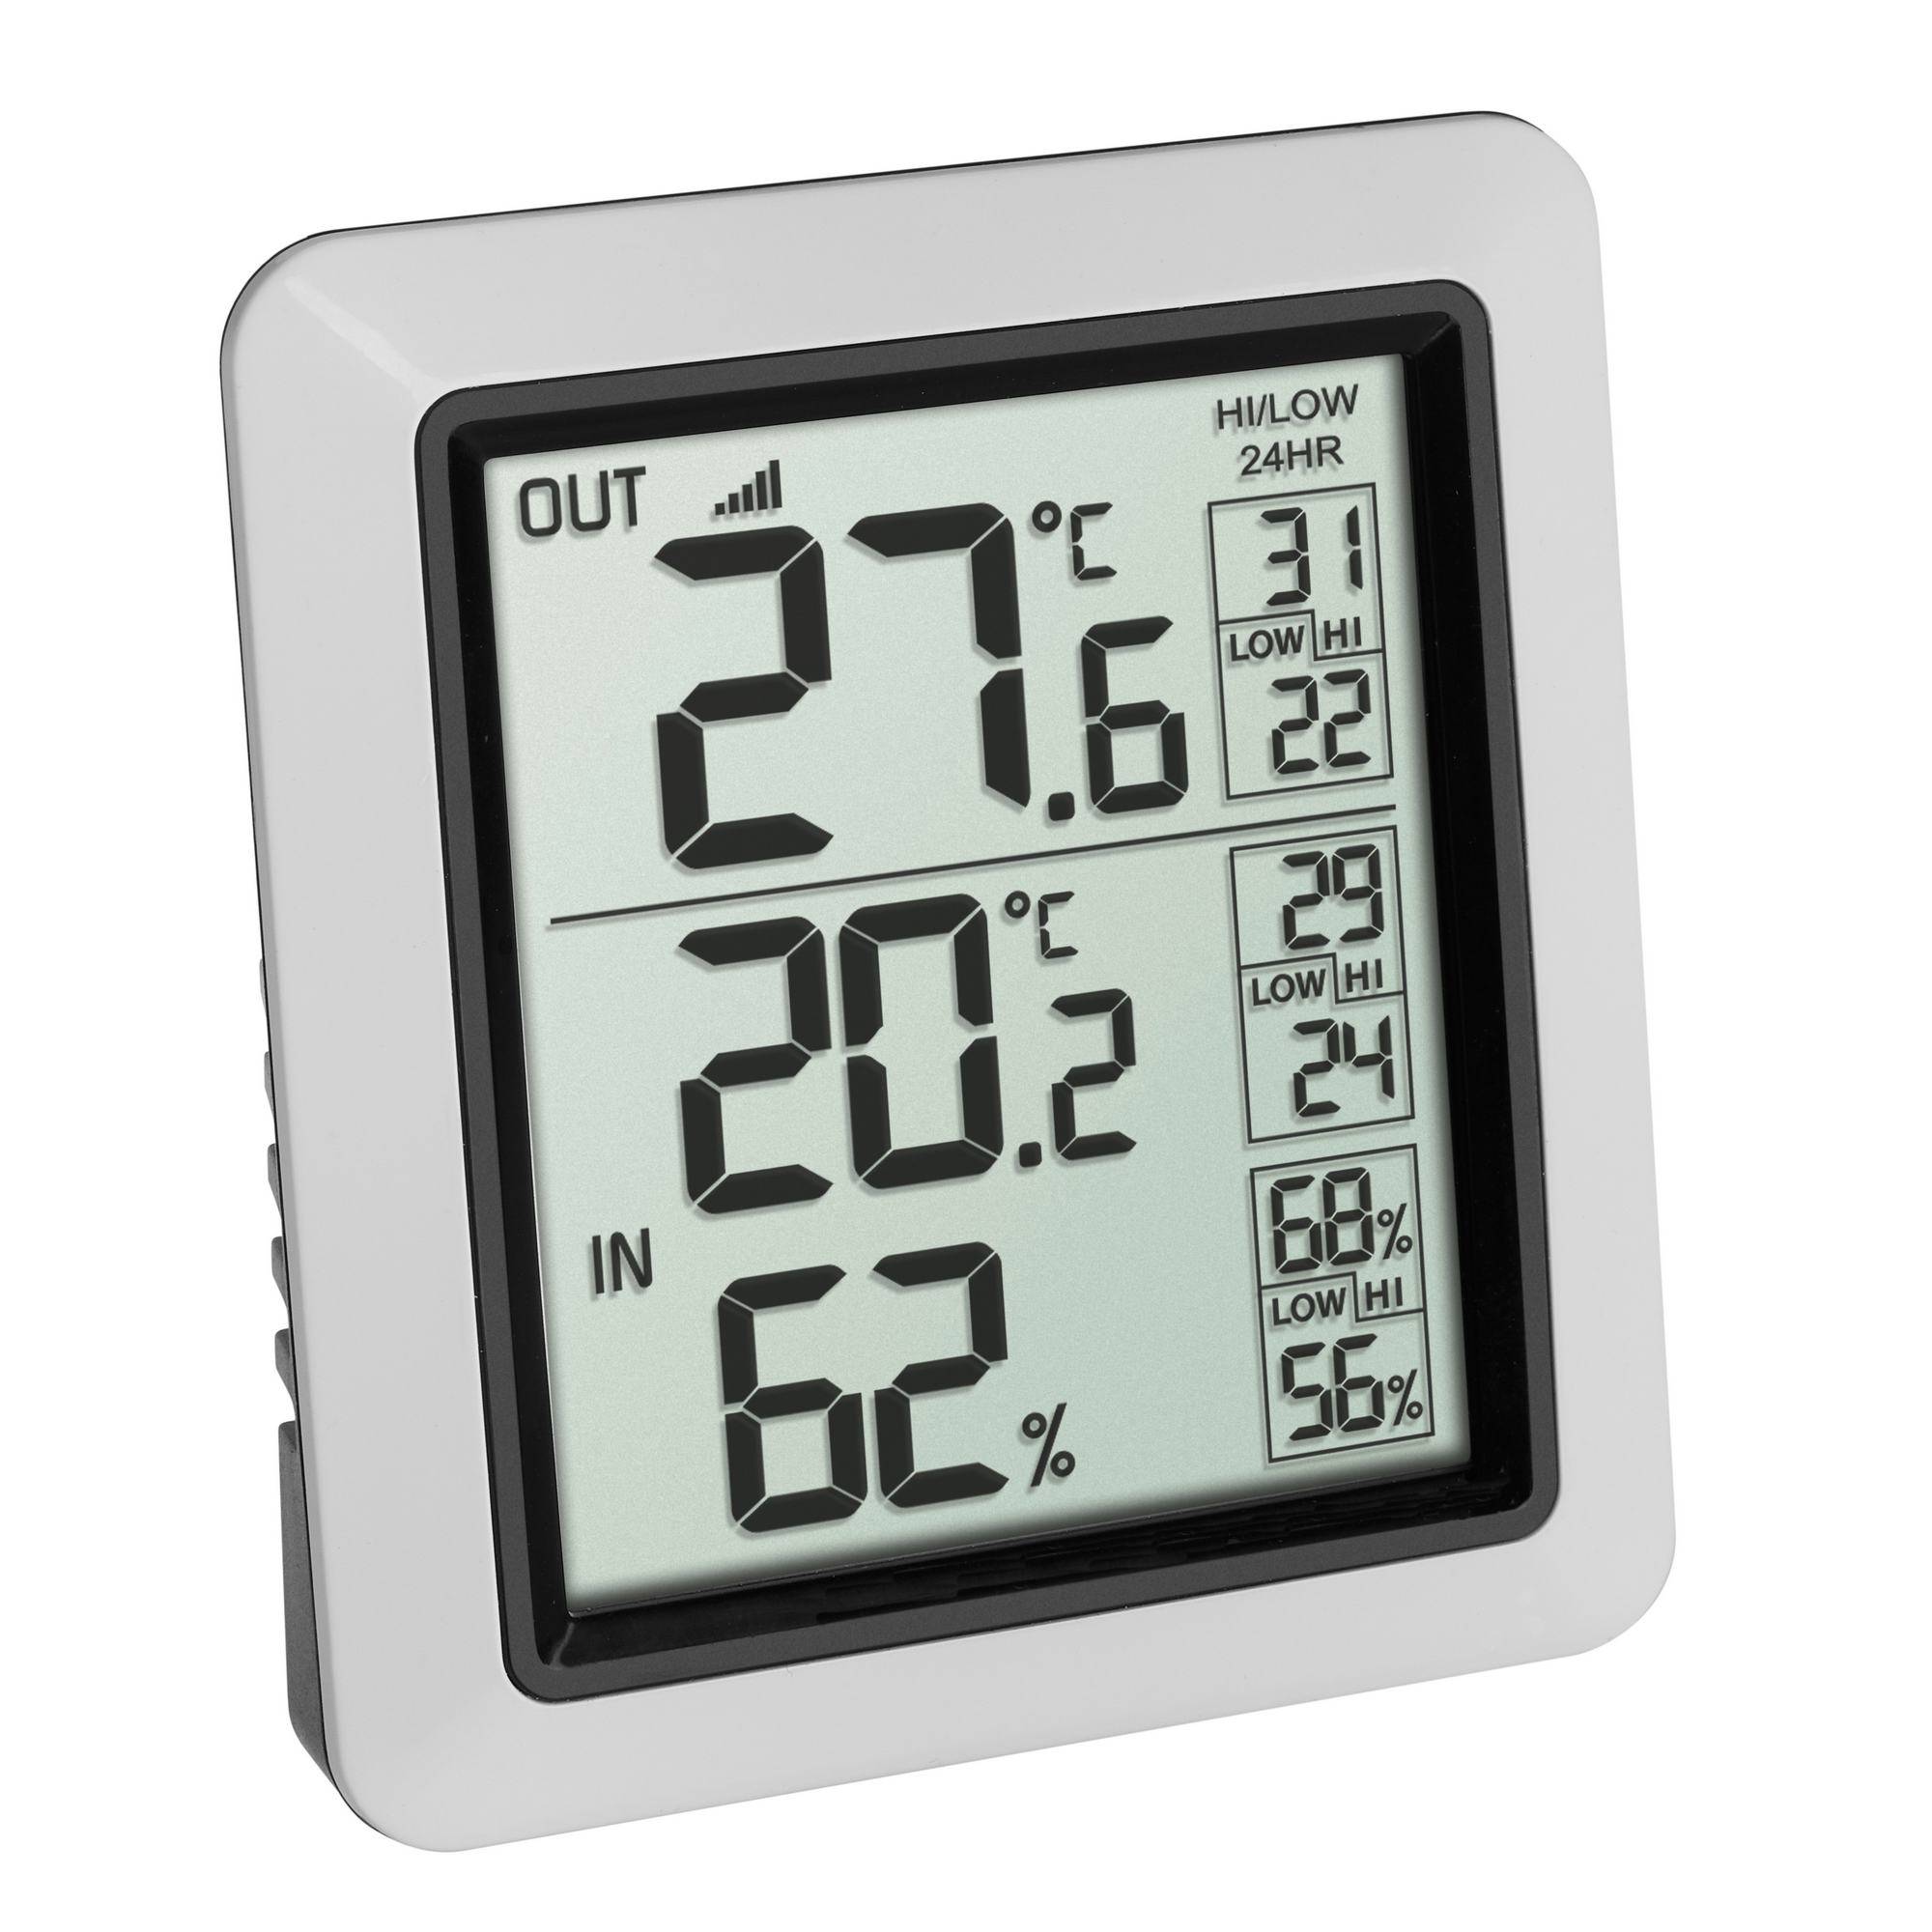 Digitales Funk-Thermometer 'Info' Kunststoff silber 7,7 x 2,2 x 8,6 cm + product picture